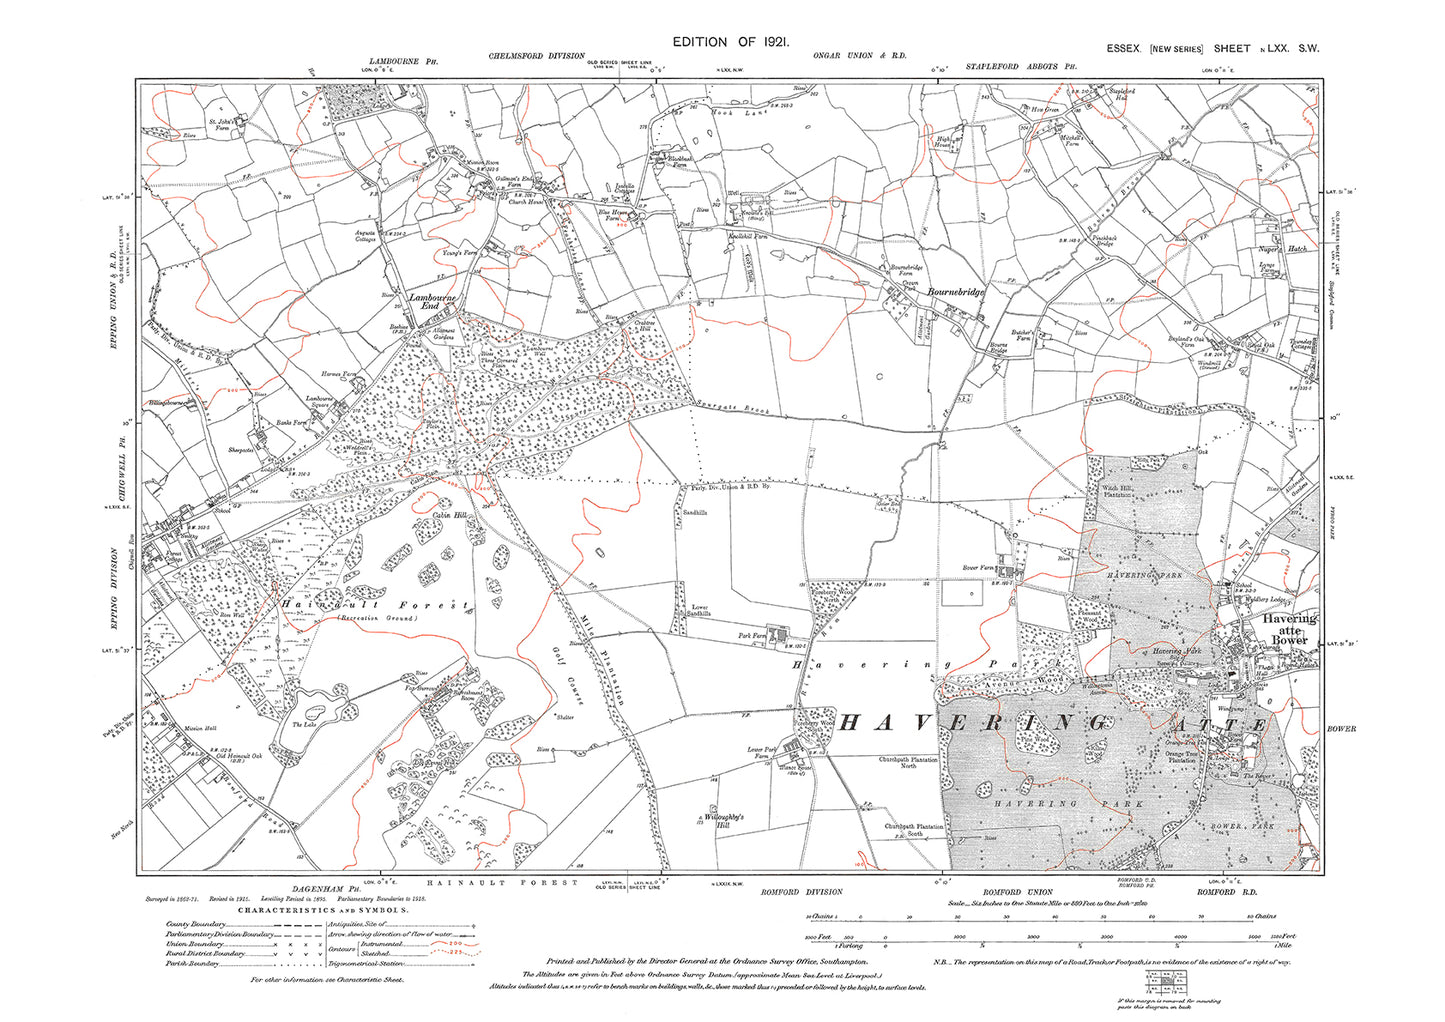 Old OS map dated 1921, showing Chigwell (east), Havering atte Bower, Lambourne End and Bournebridge in Essex - 70SW